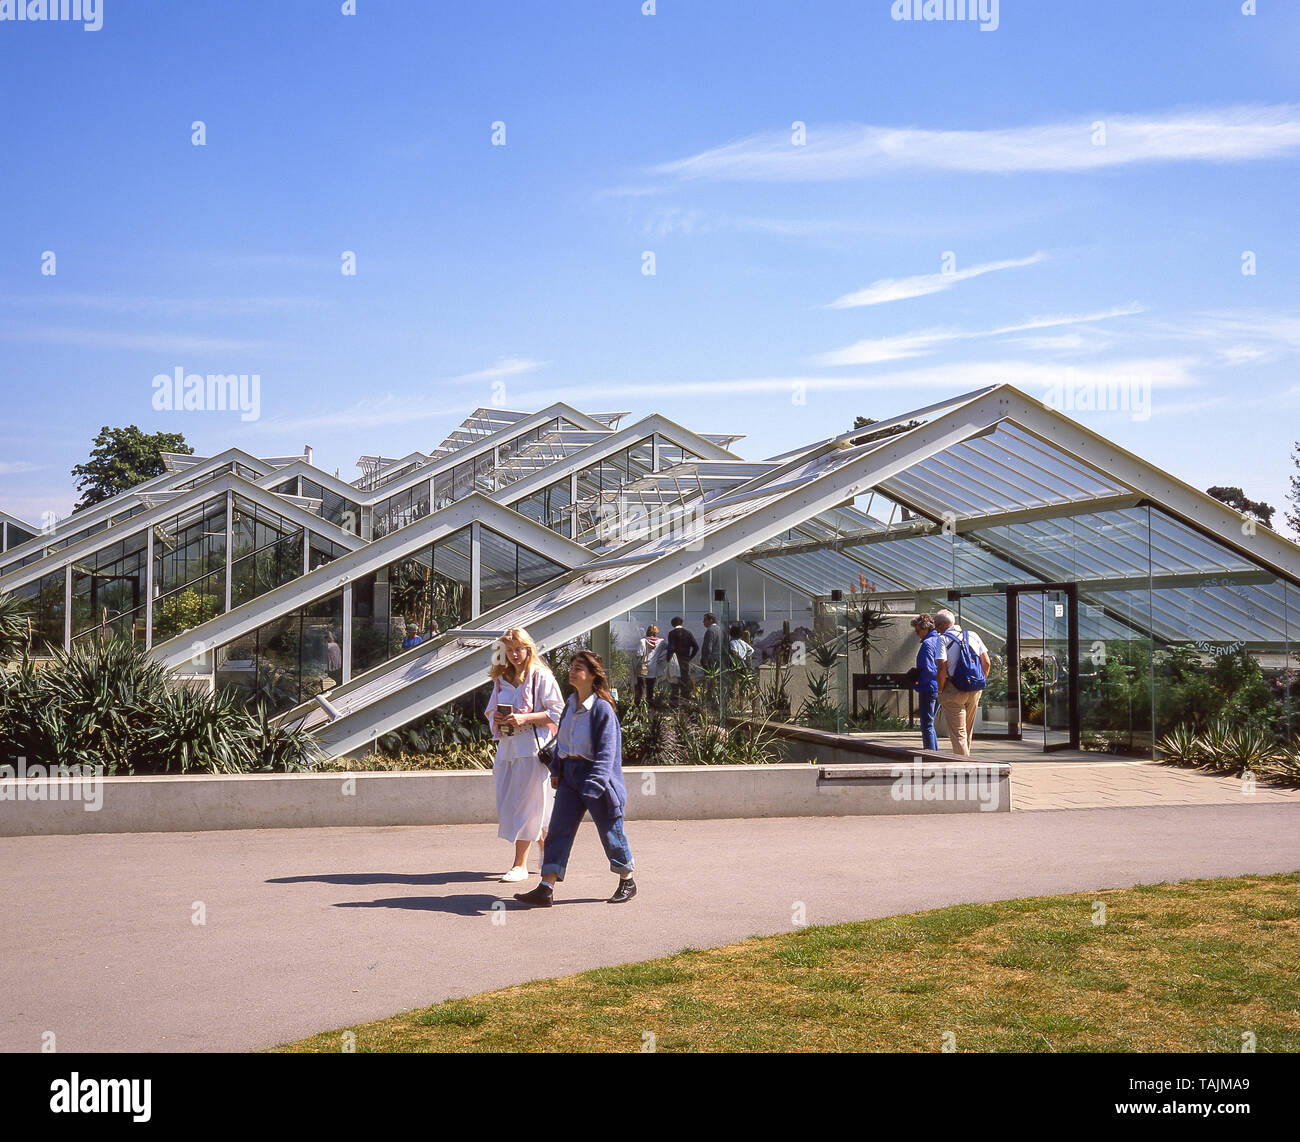 Princess of Wales Conservatory, Royal Botanical Gardens, Kew, London Borough of Richmond upon Thames, Greater London, Angleterre, Royaume-Uni Banque D'Images